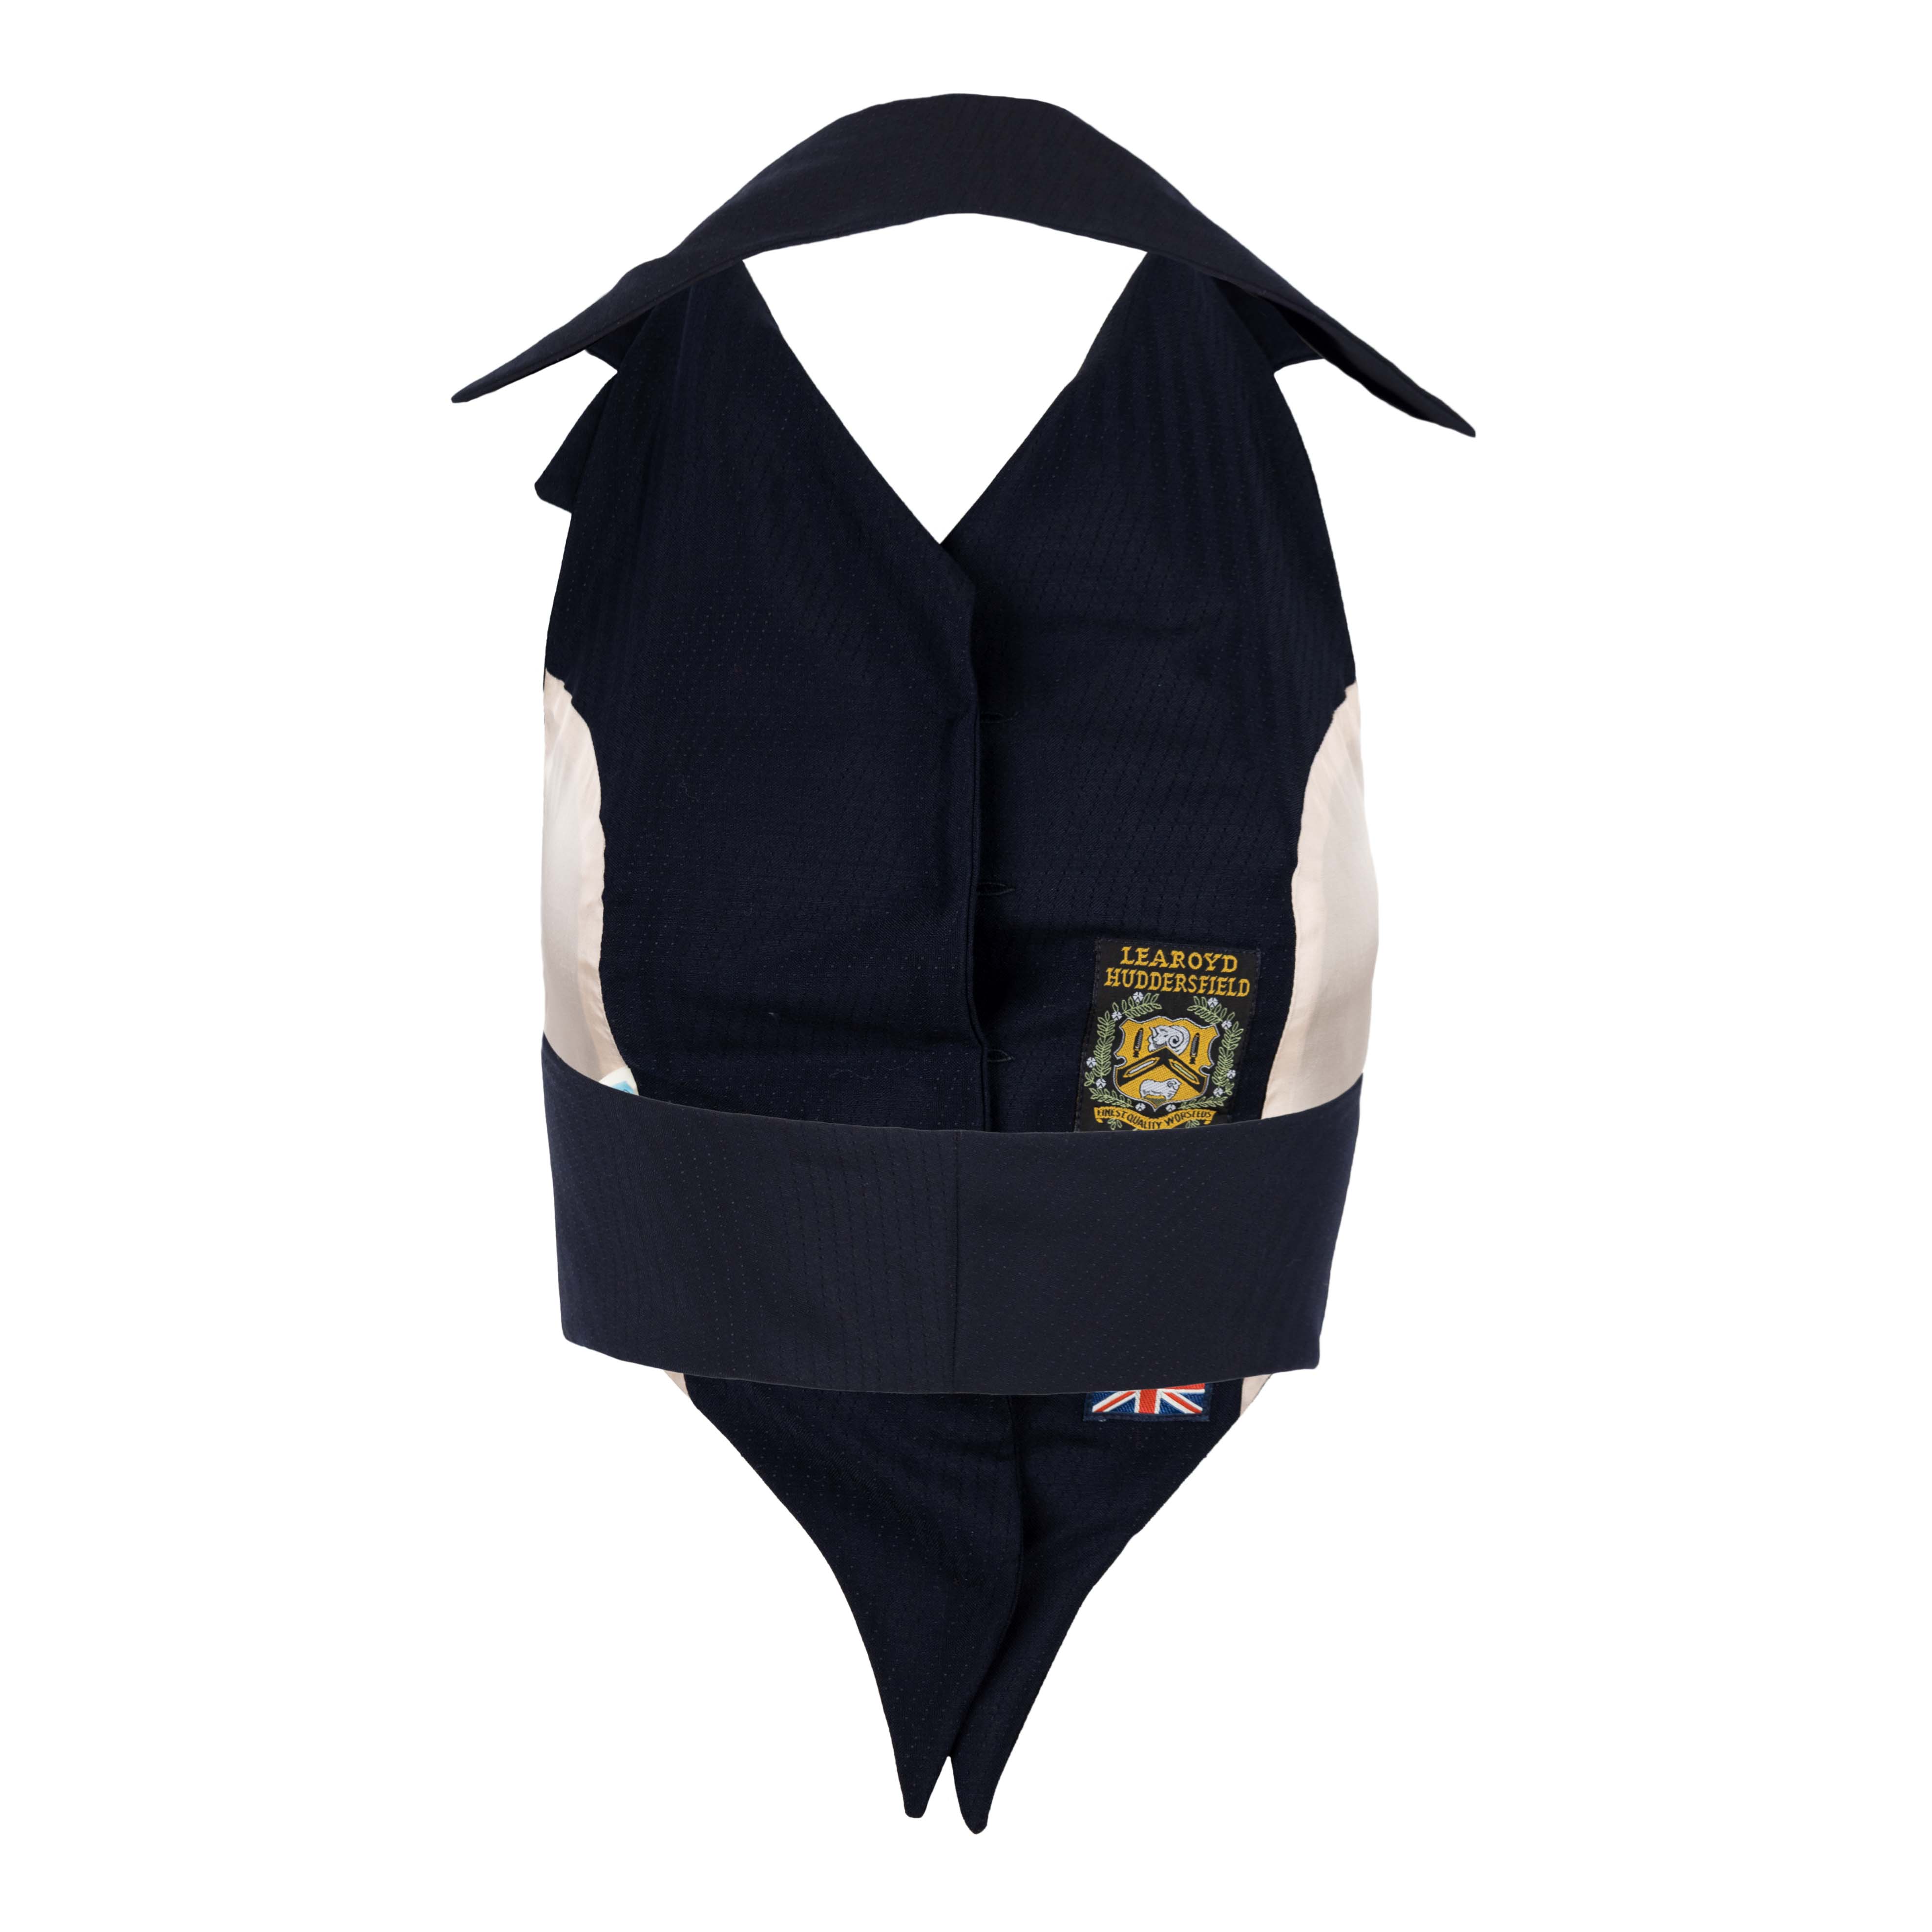 The fitted waistcoat by Vivienne Westwood is a rare vintage piece which was made in England. The vest features gold tone logo buttons and a pointed tip. The elongated collar accentuates the silhouette of the waistcoat and makes it a perfect piece to